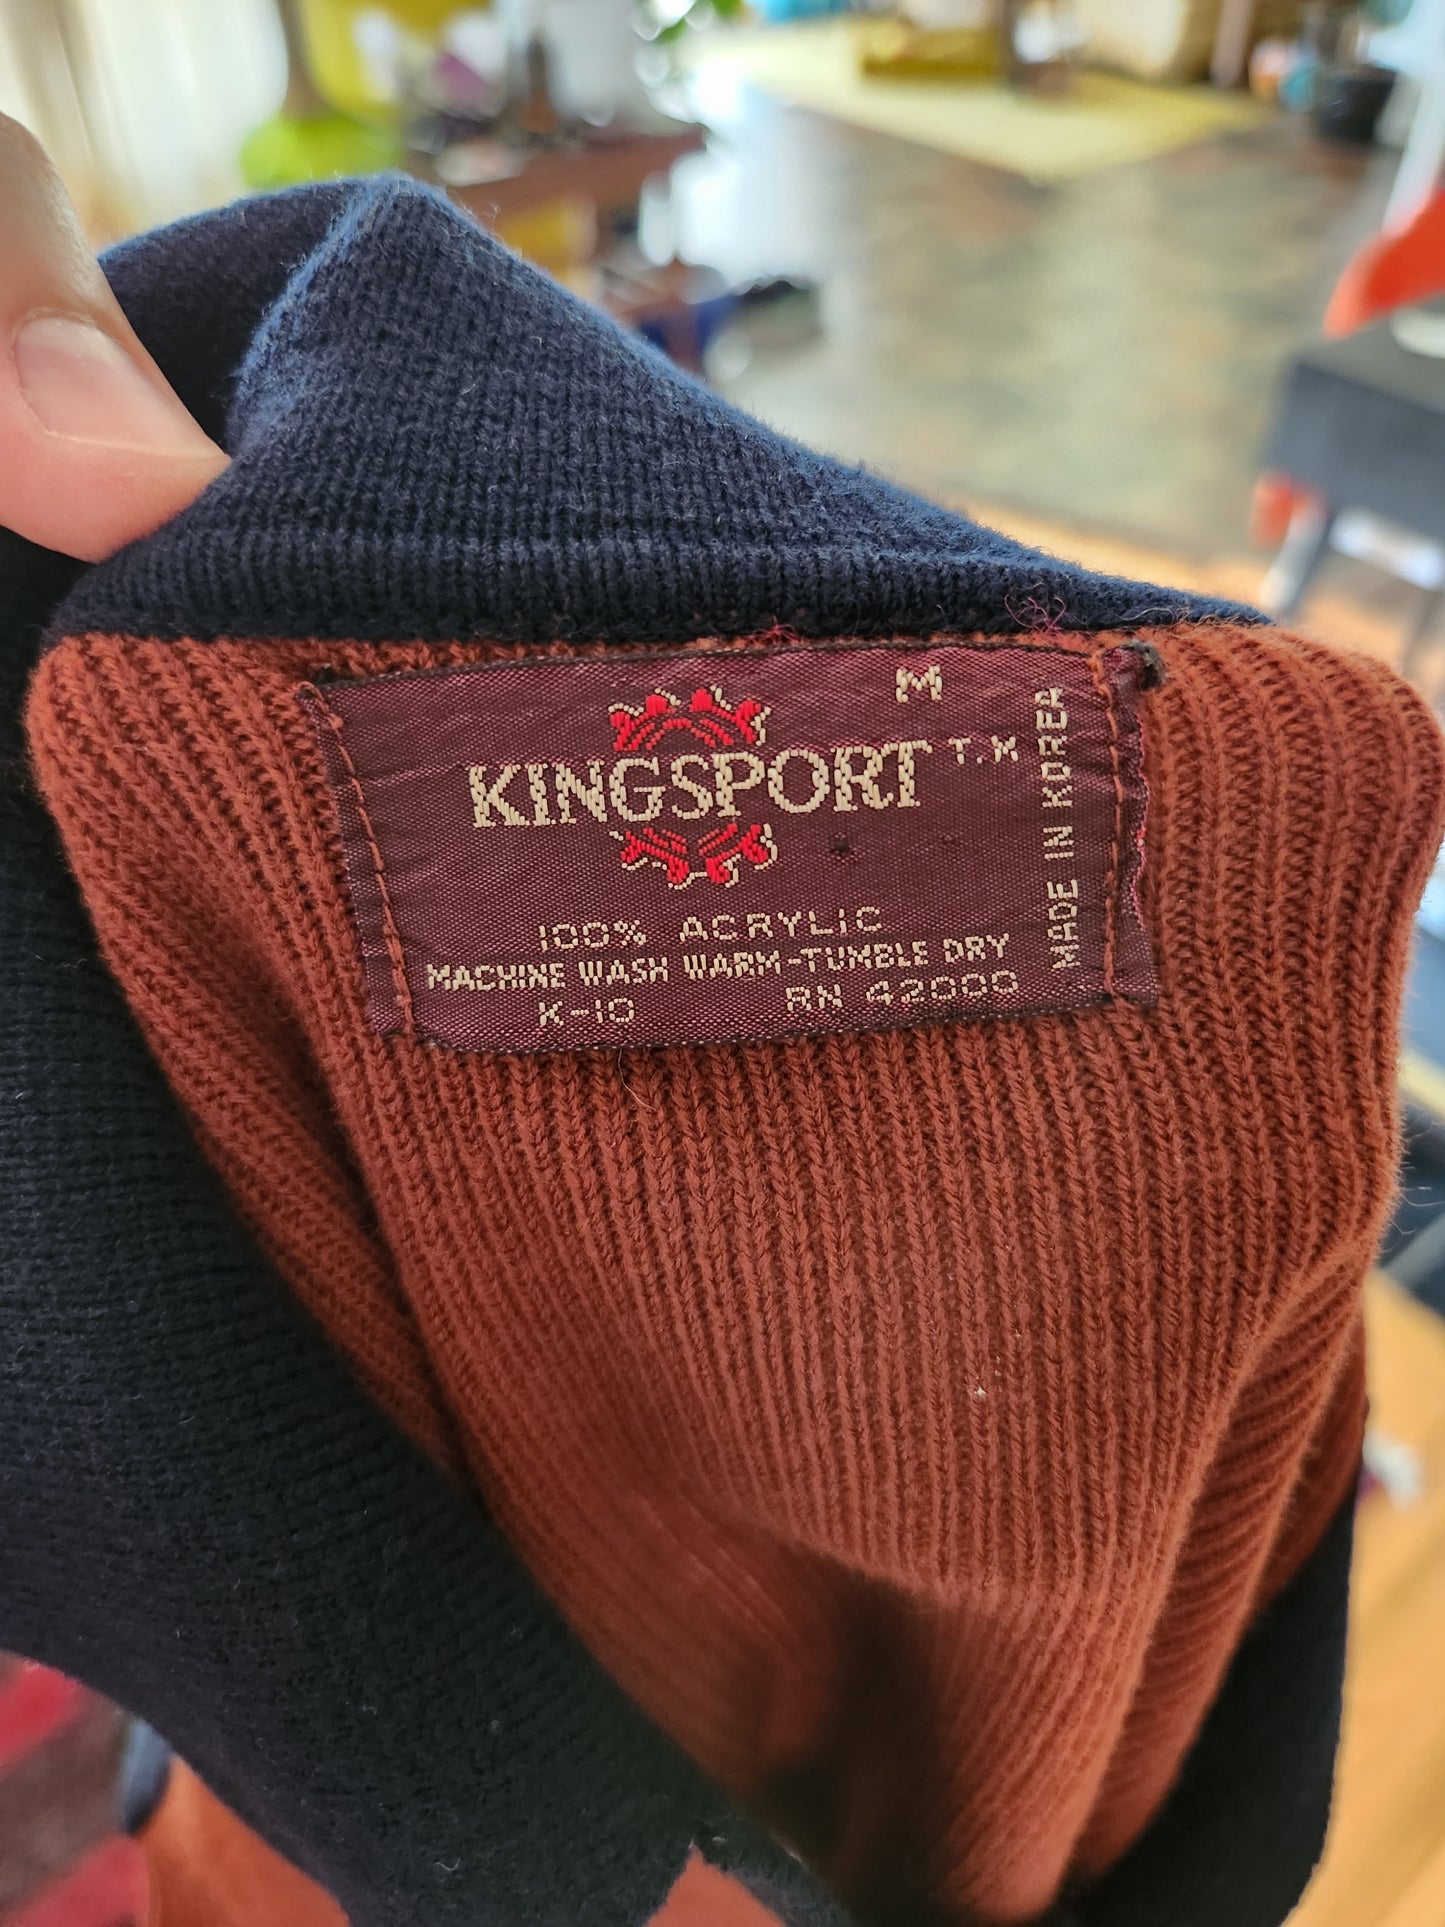 Vintage Light Weight Sweater by Kingsport